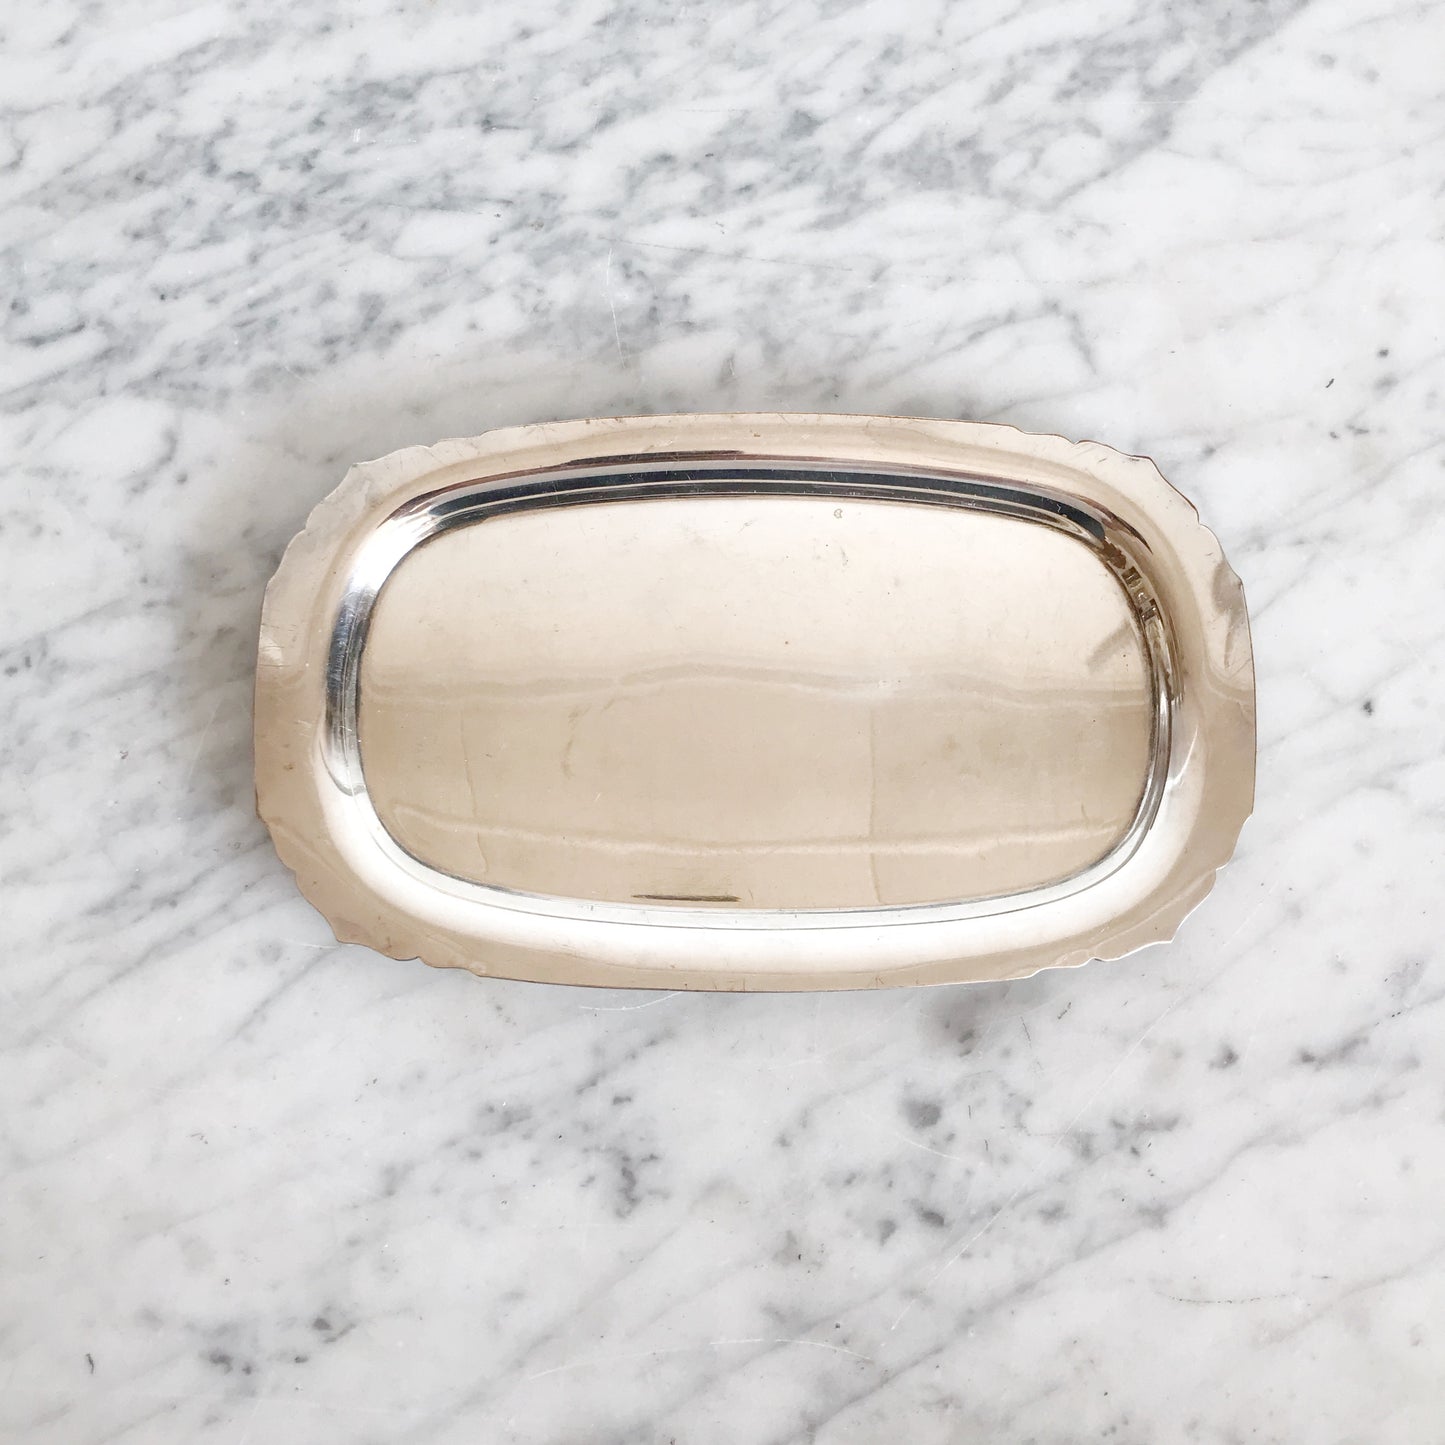 Vintage Silver Tray with Decorative Corners